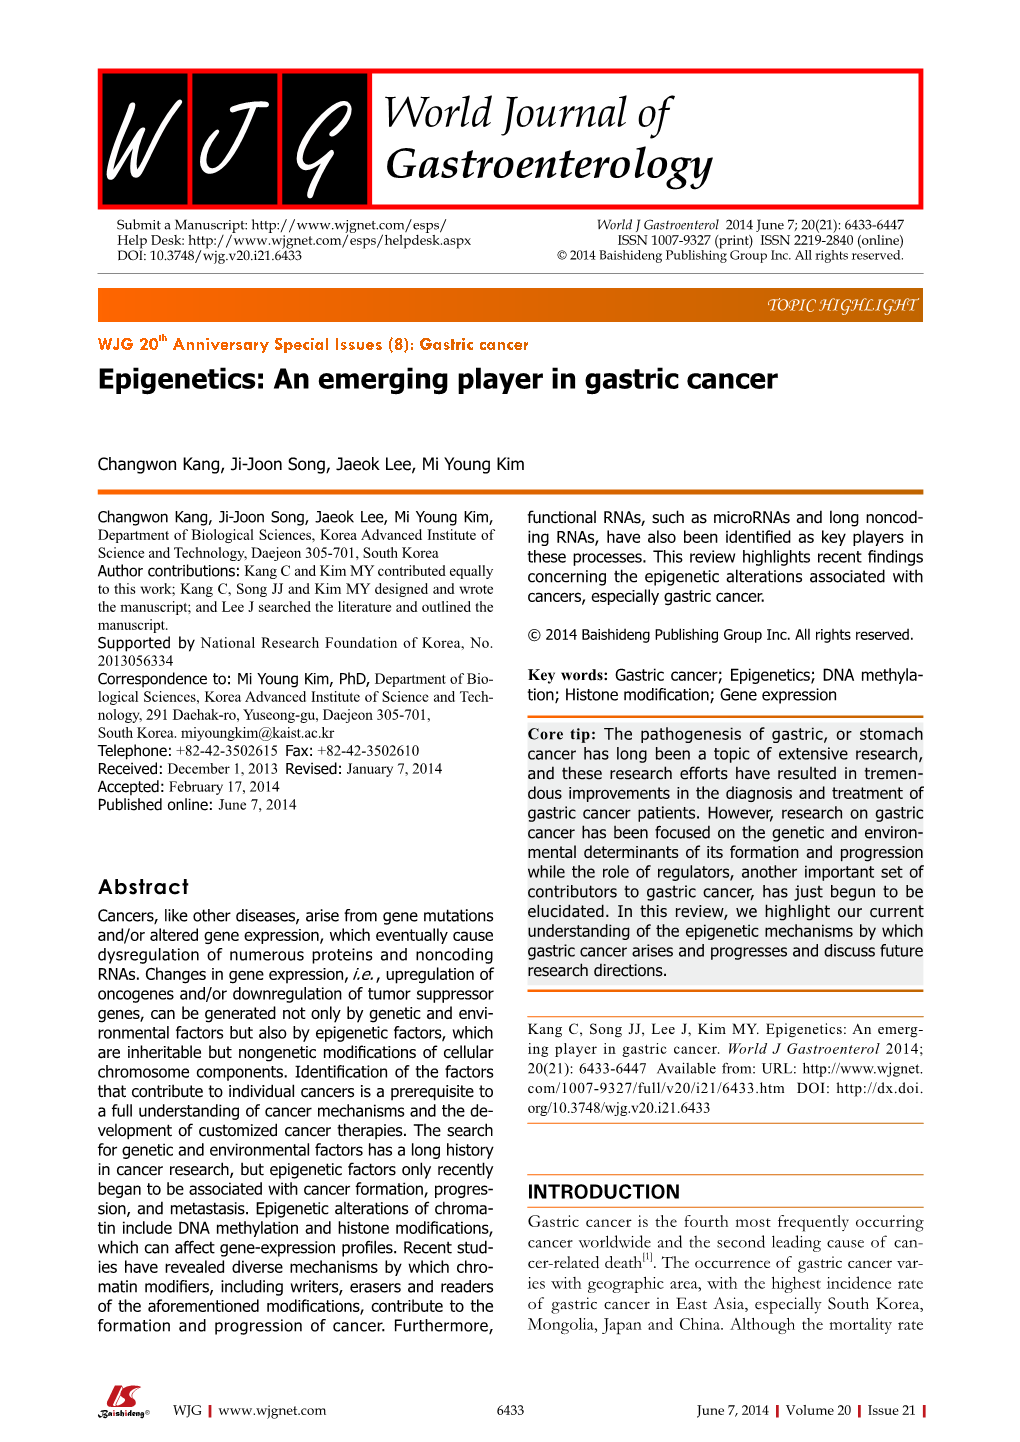 An Emerging Player in Gastric Cancer